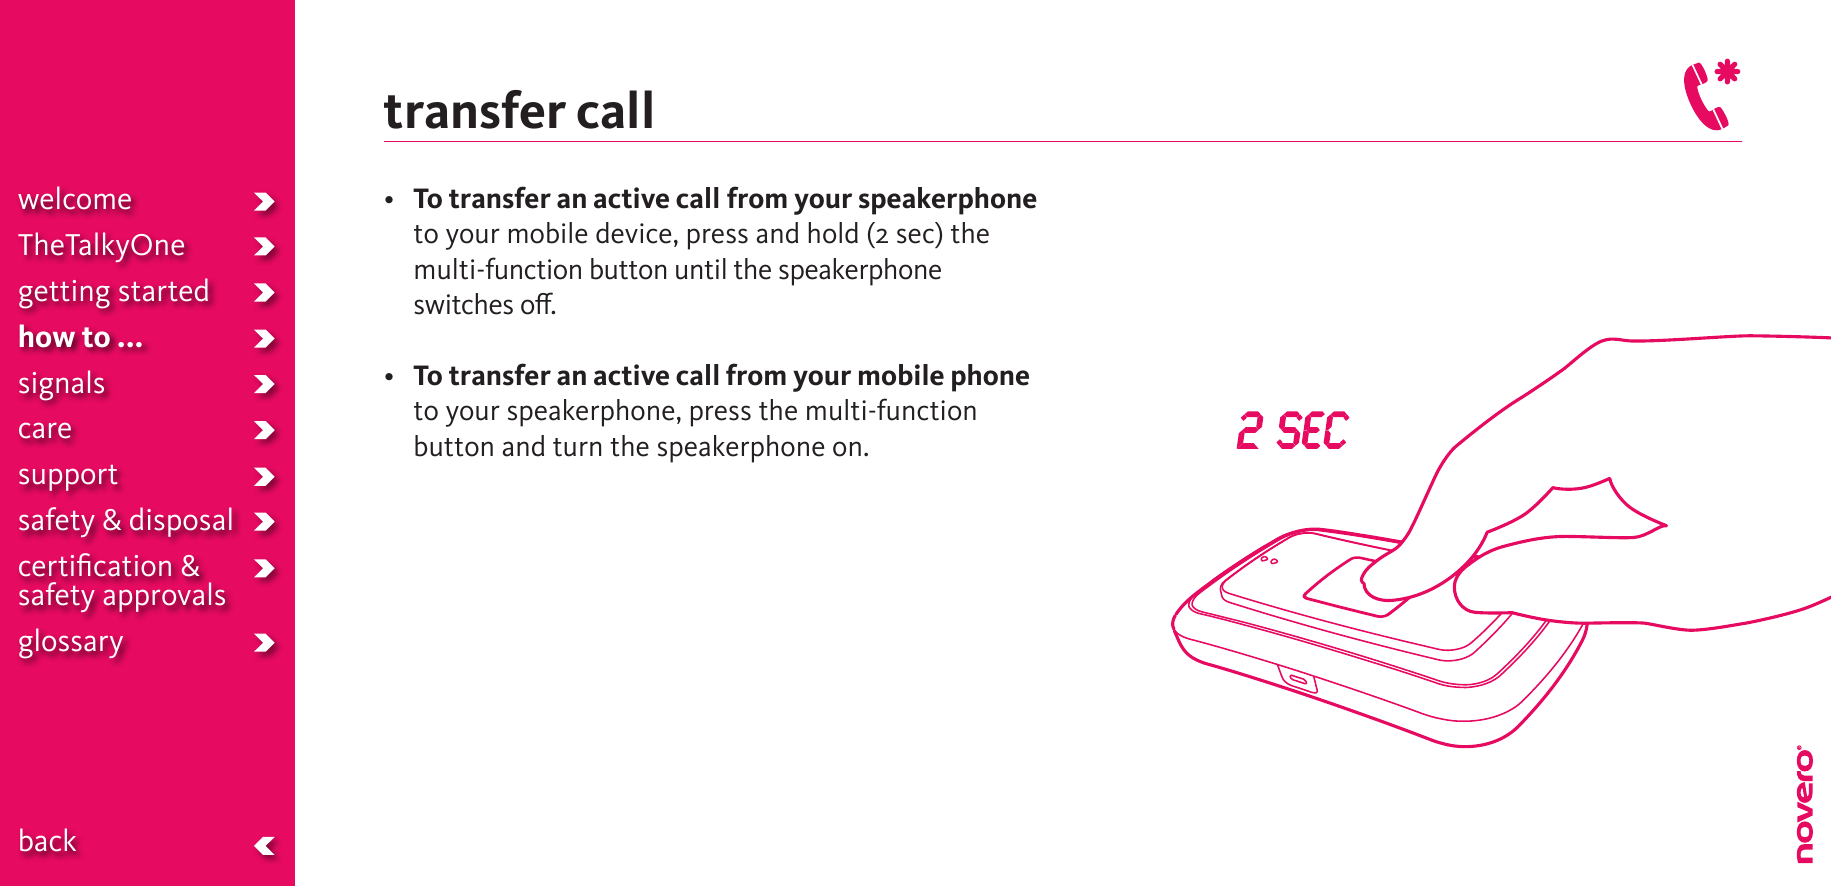 transfer call• To transfer an active call from your speakerphone to your mobile device, press and hold (2 sec) the multi-function button until the speakerphone switches o.• To transfer an active call from your mobile phone to your speakerphone, press the multi-function button and turn the speakerphone on.welcomeTheTalkyOnegetting startedhow to ...signalscaresupportsafety &amp; disposalcertiﬁcation &amp;  safety approvals glossary  back